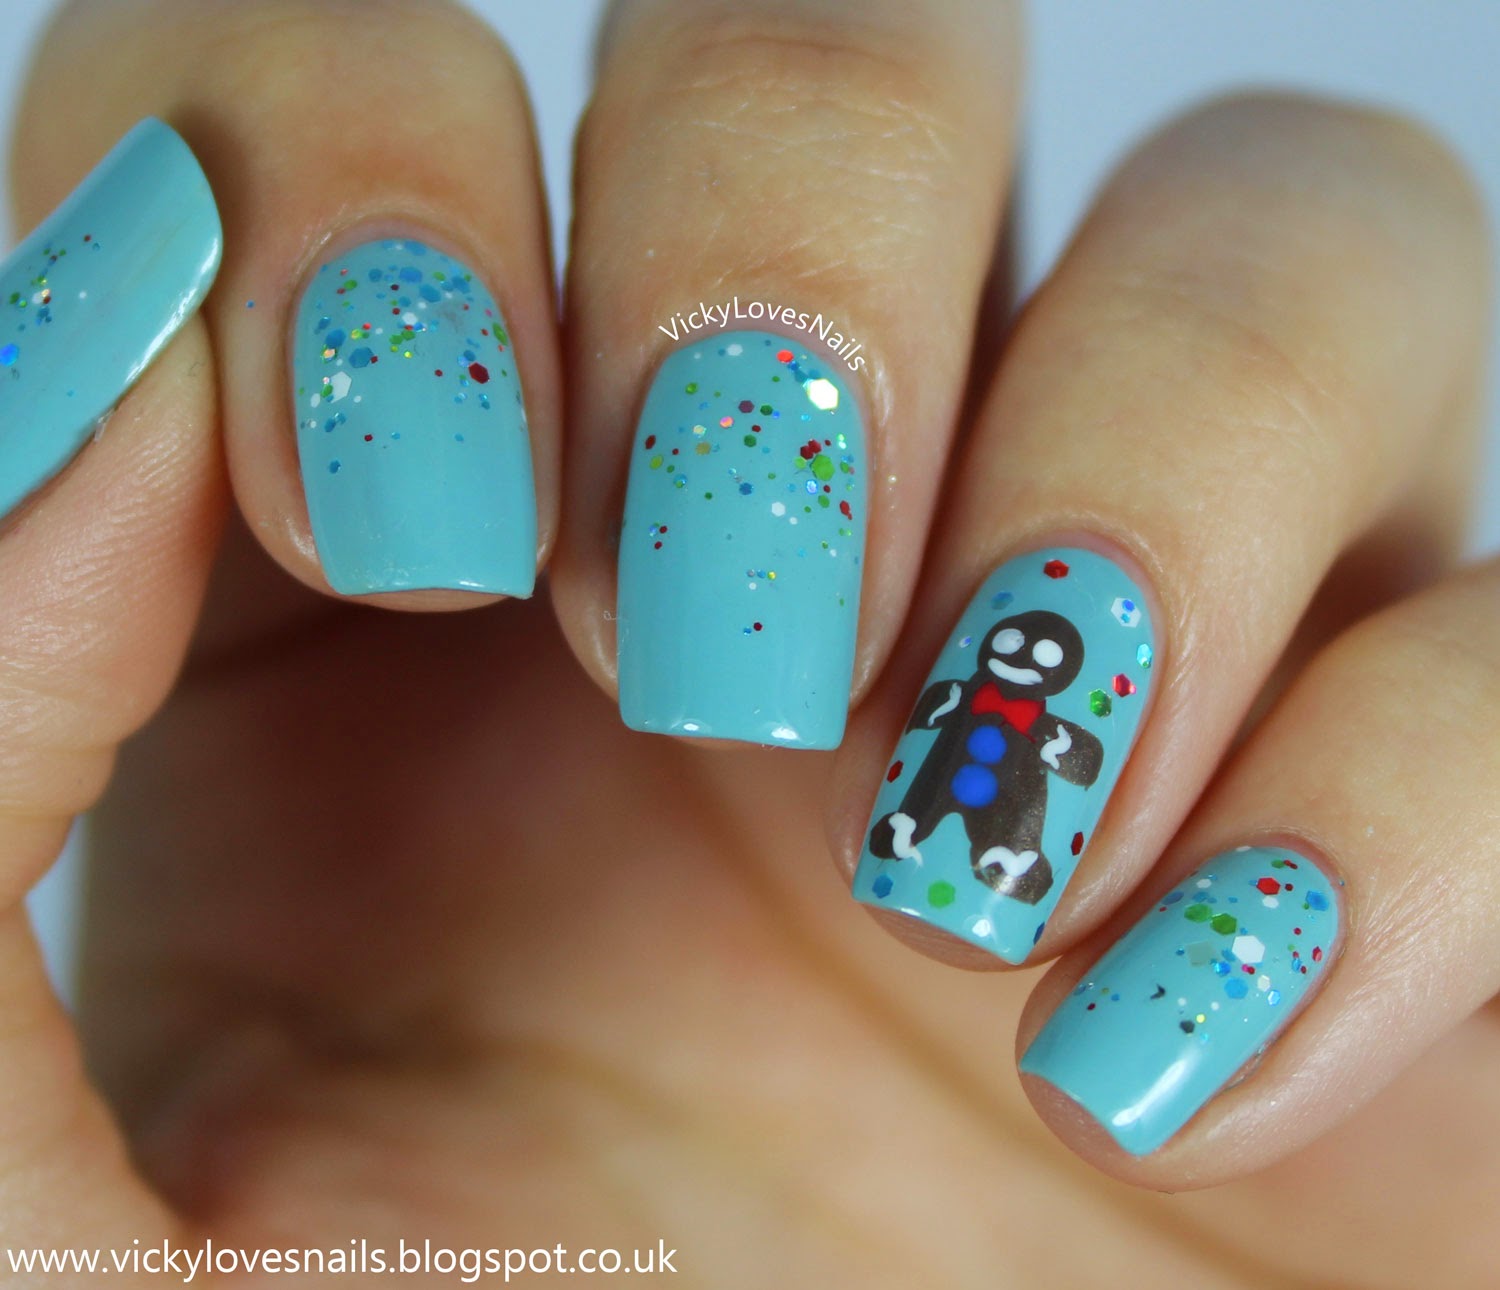 Vicky Loves Nails!: Gingerbread Man!